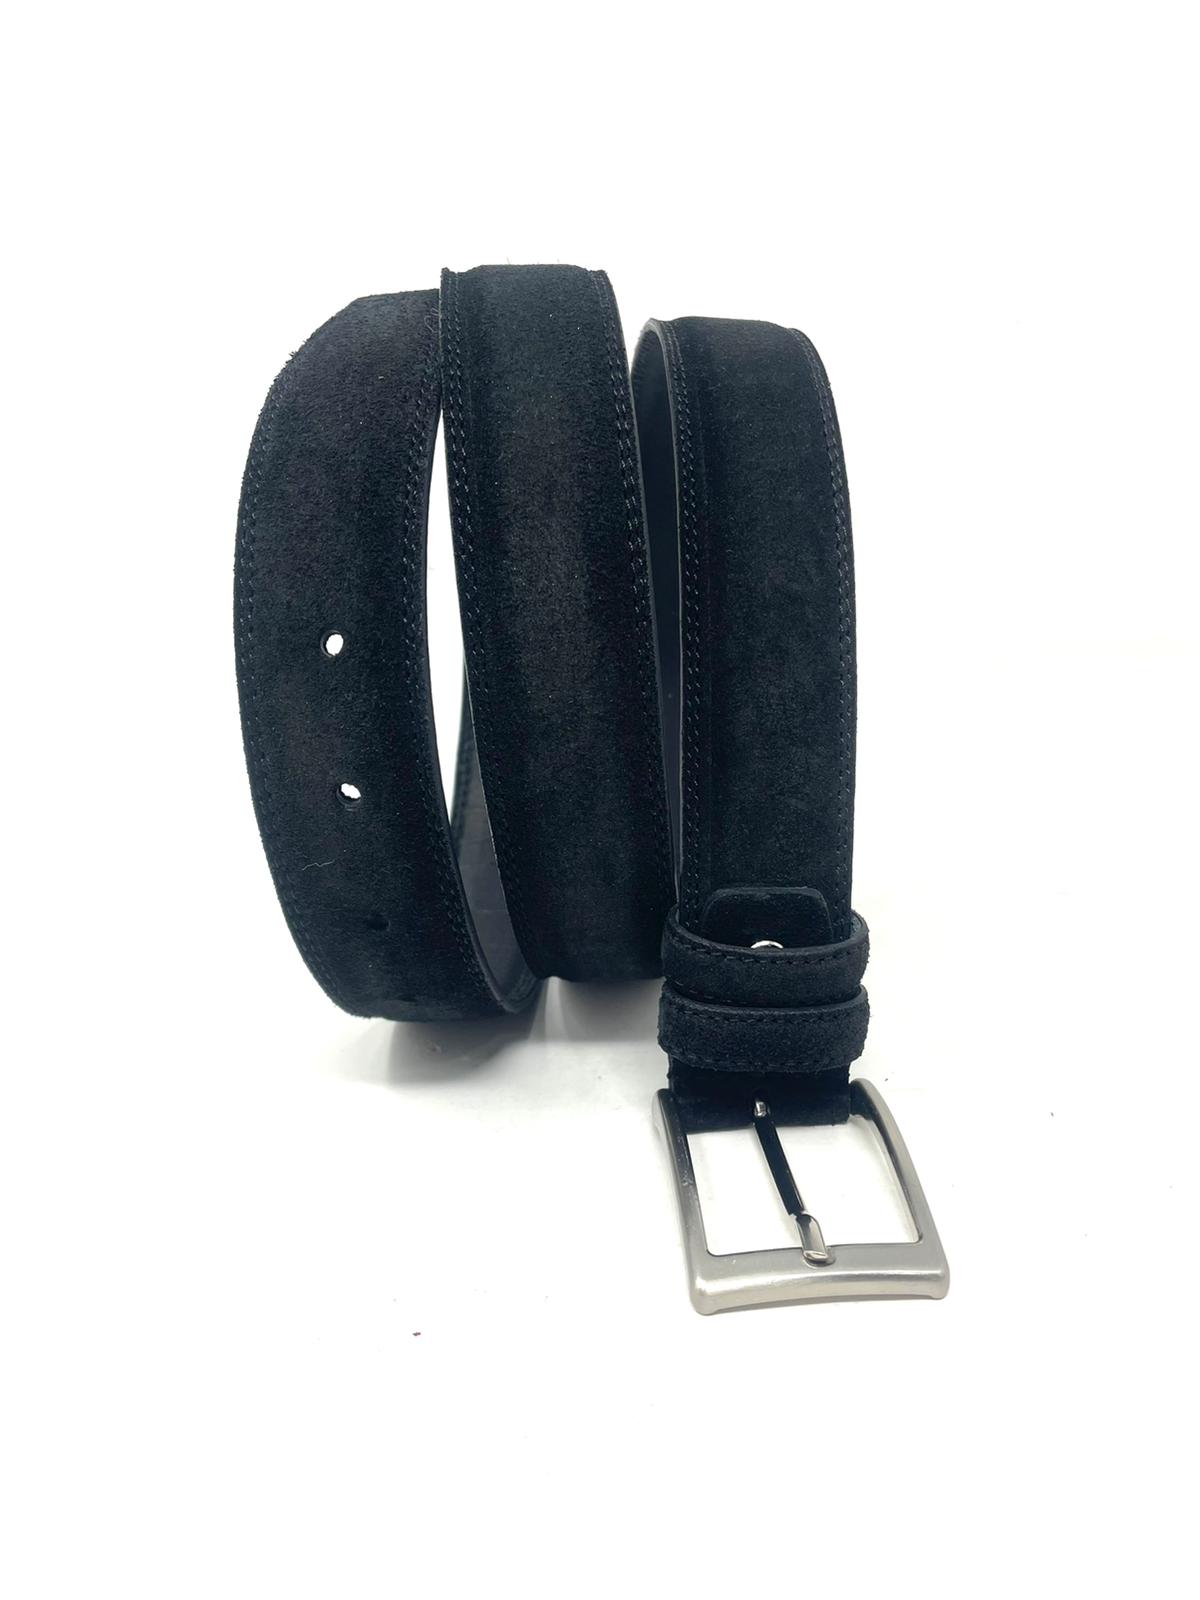 SUEDE leather belt made in Italy